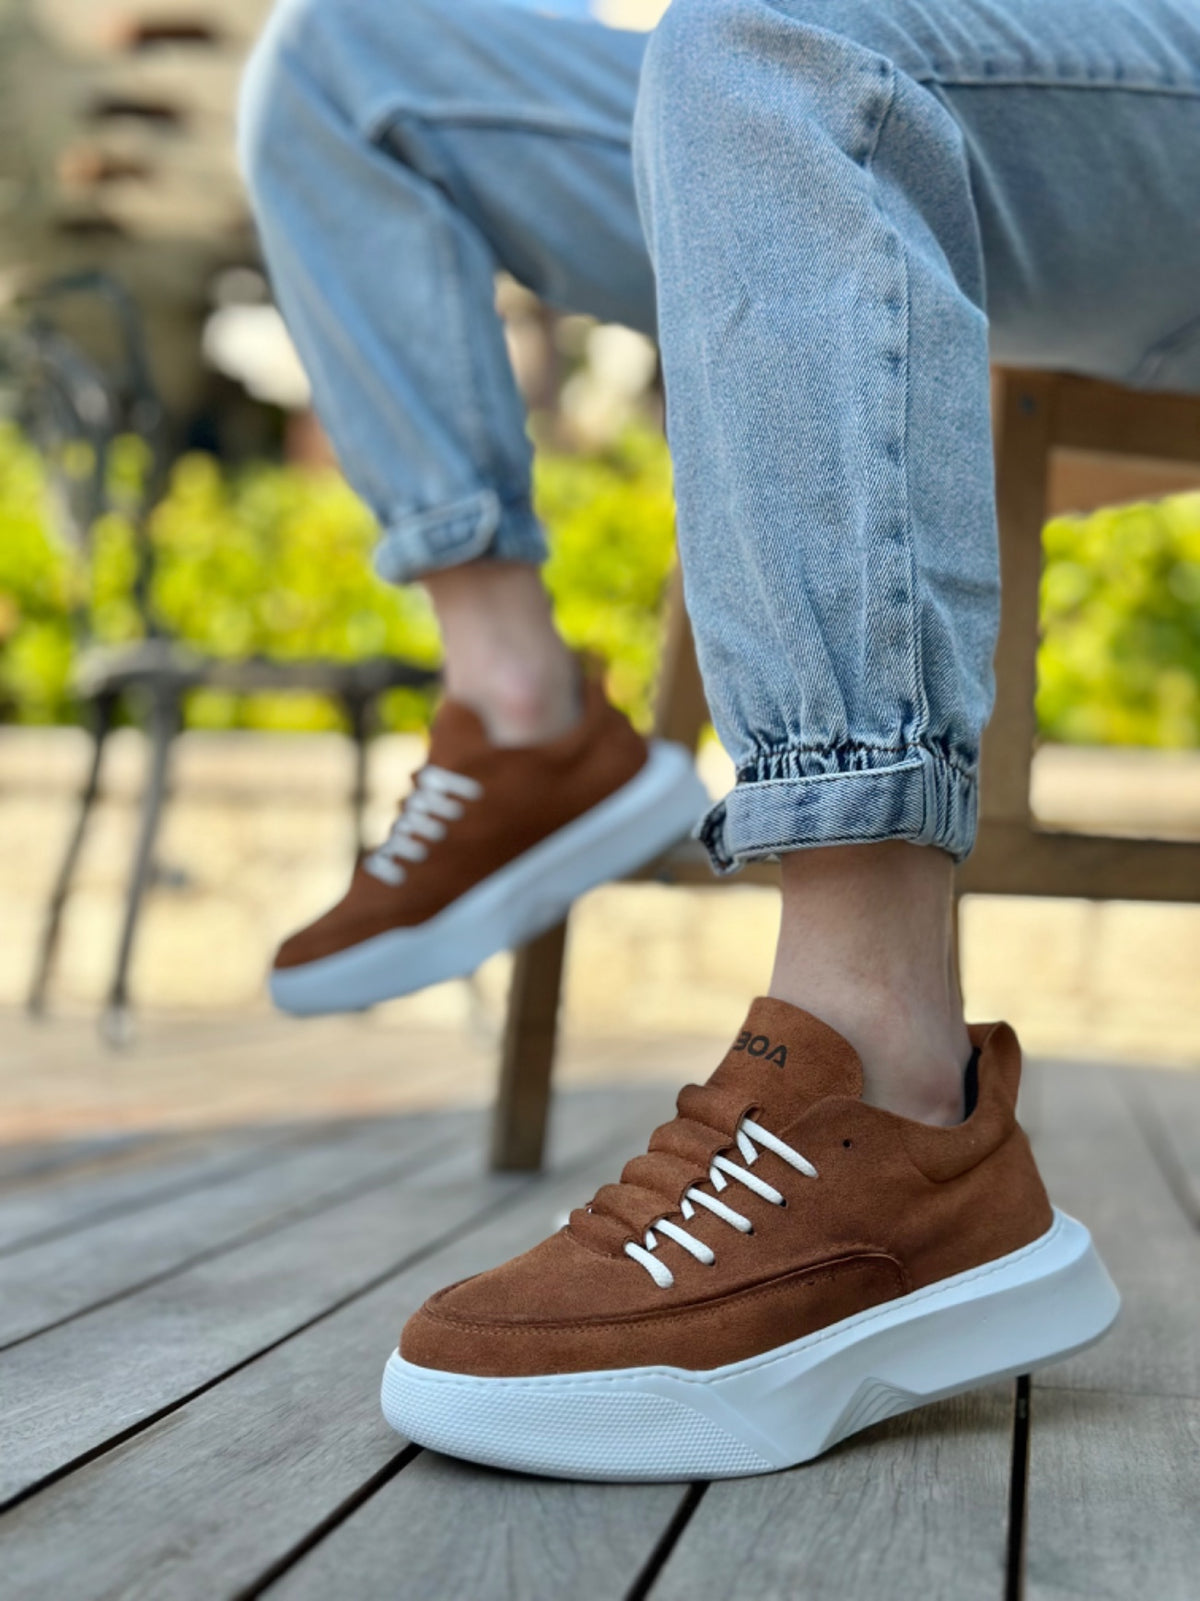 BA0332 Ladder Pattern Lace-Up Men's High Sole Tan Suede White Sole Sports Shoes - STREETMODE™